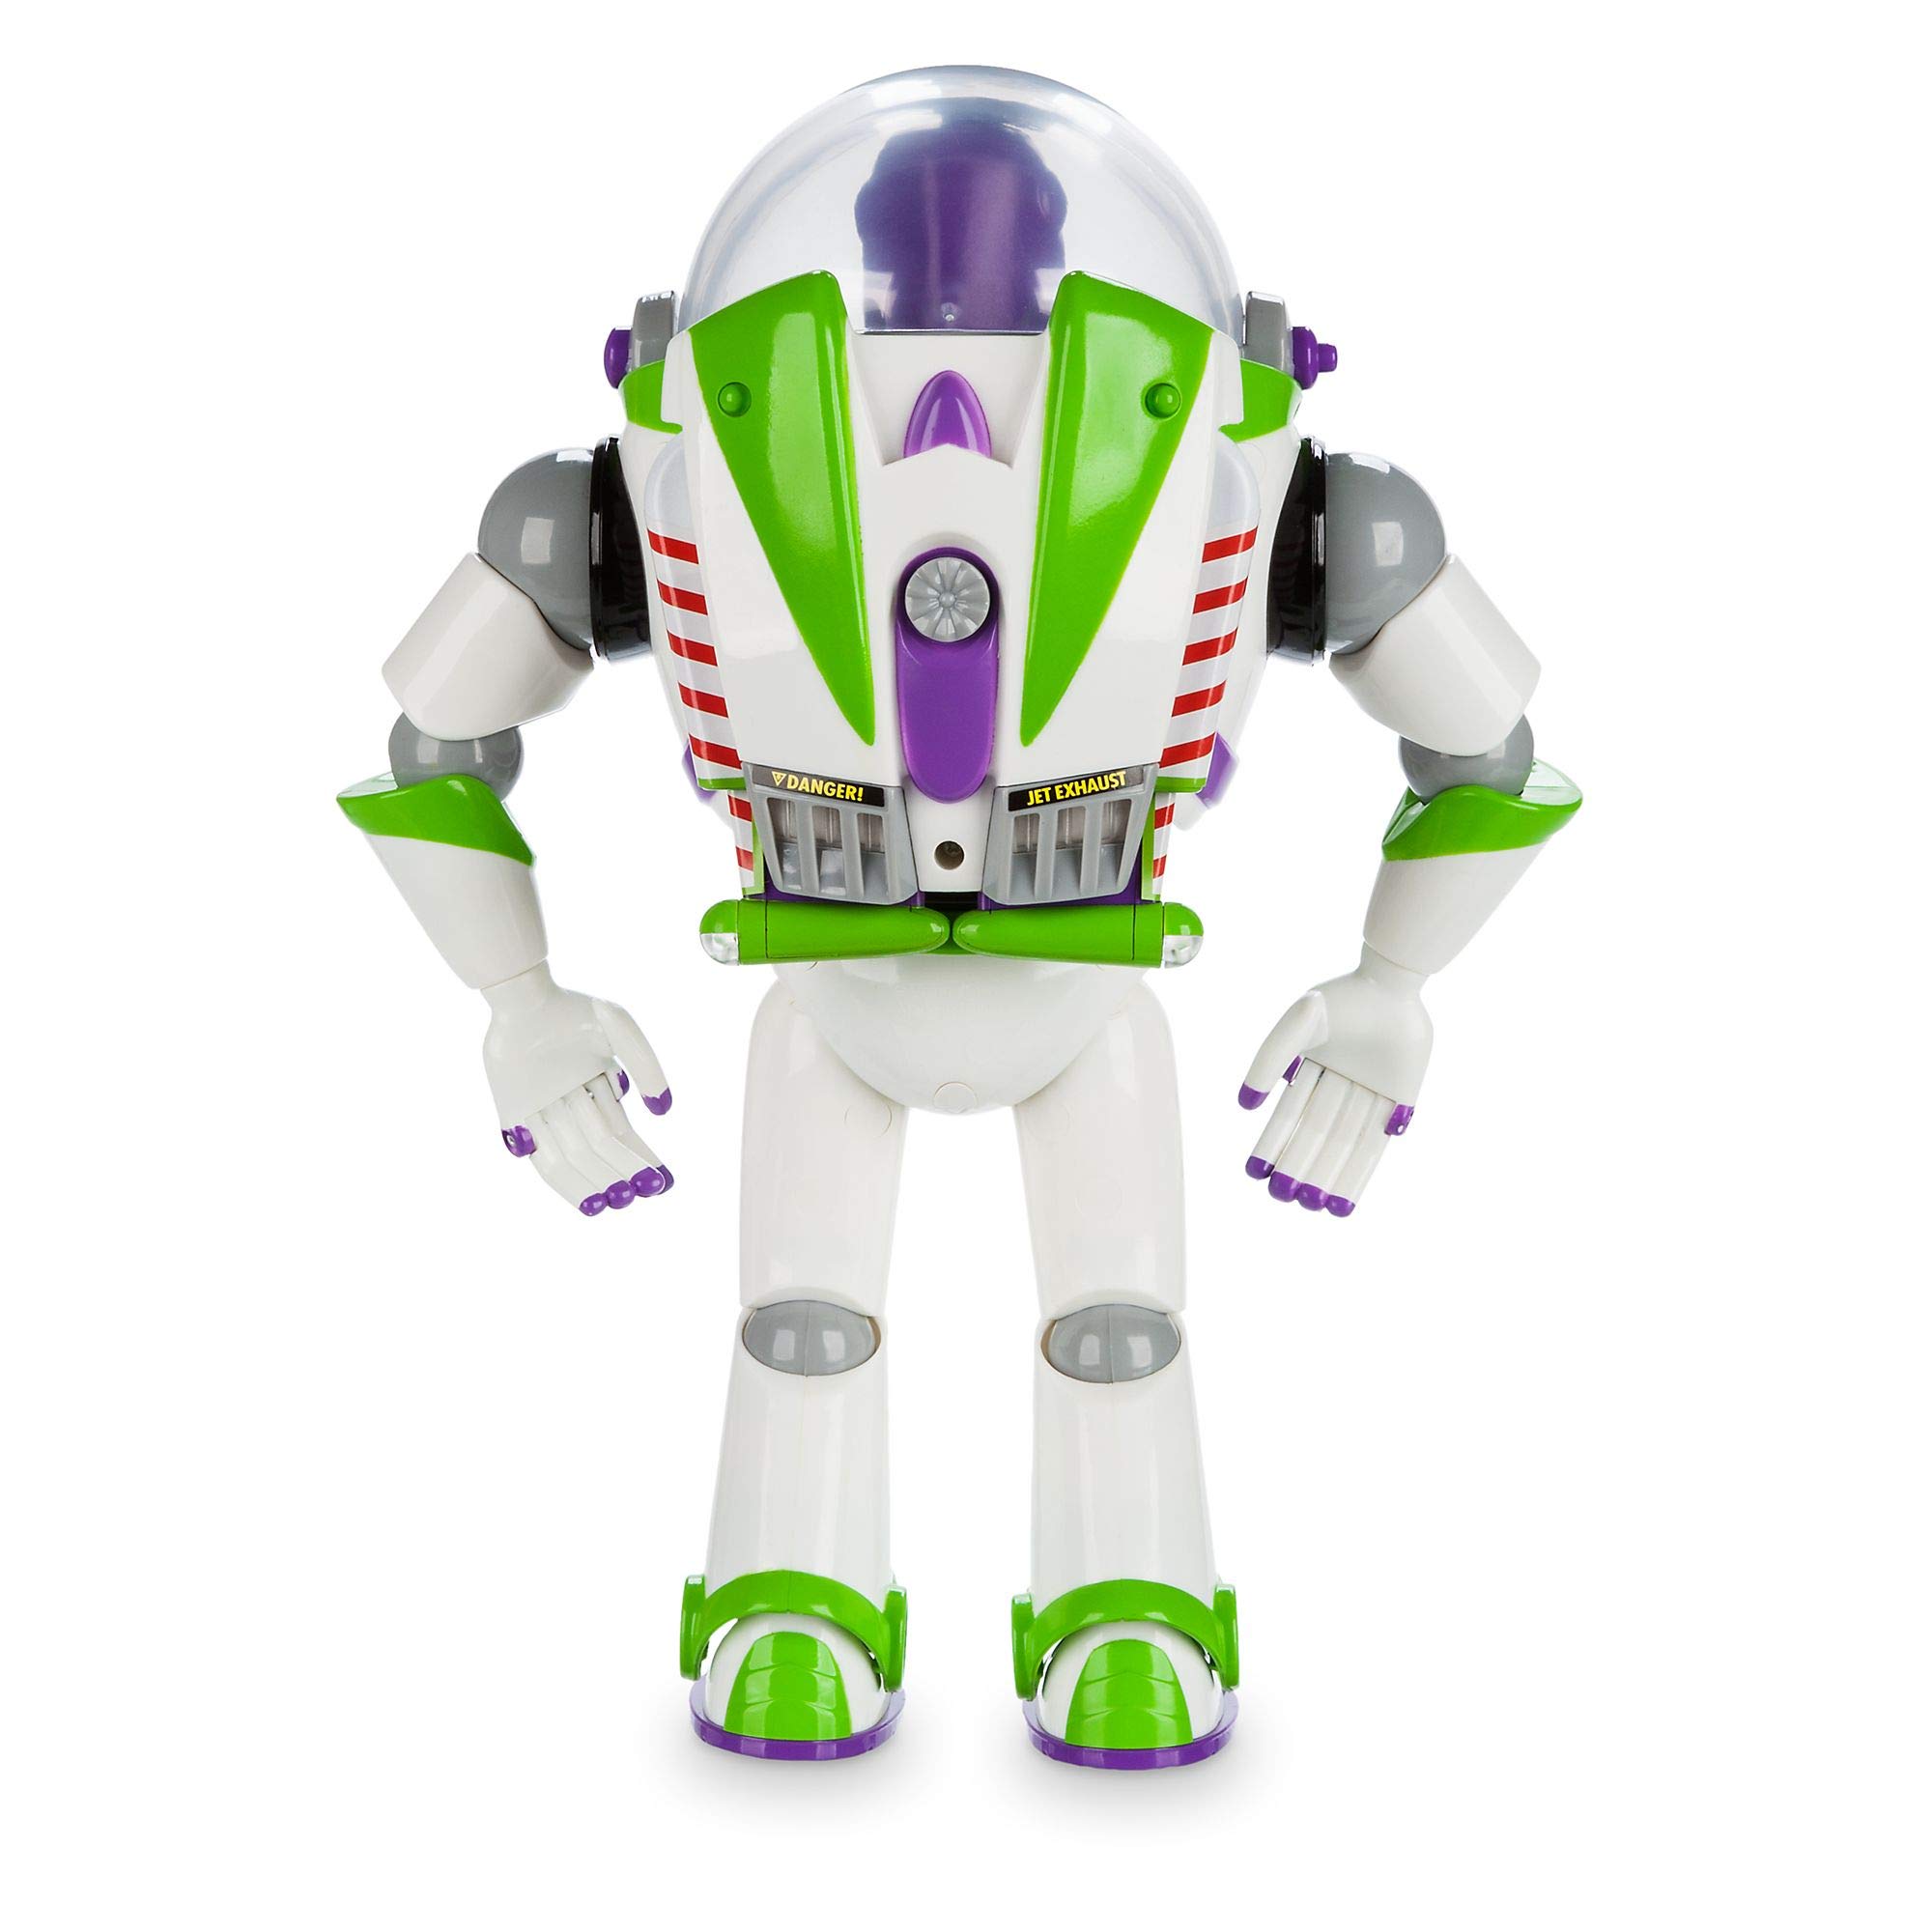 Disney Store Official Buzz Lightyear Interactive Talking Action Figure from Toy Story, 11 inch, Features 10+ English Phrases, Interacts with Other Figures and Toys, Light-Beam Features, Ages 3+